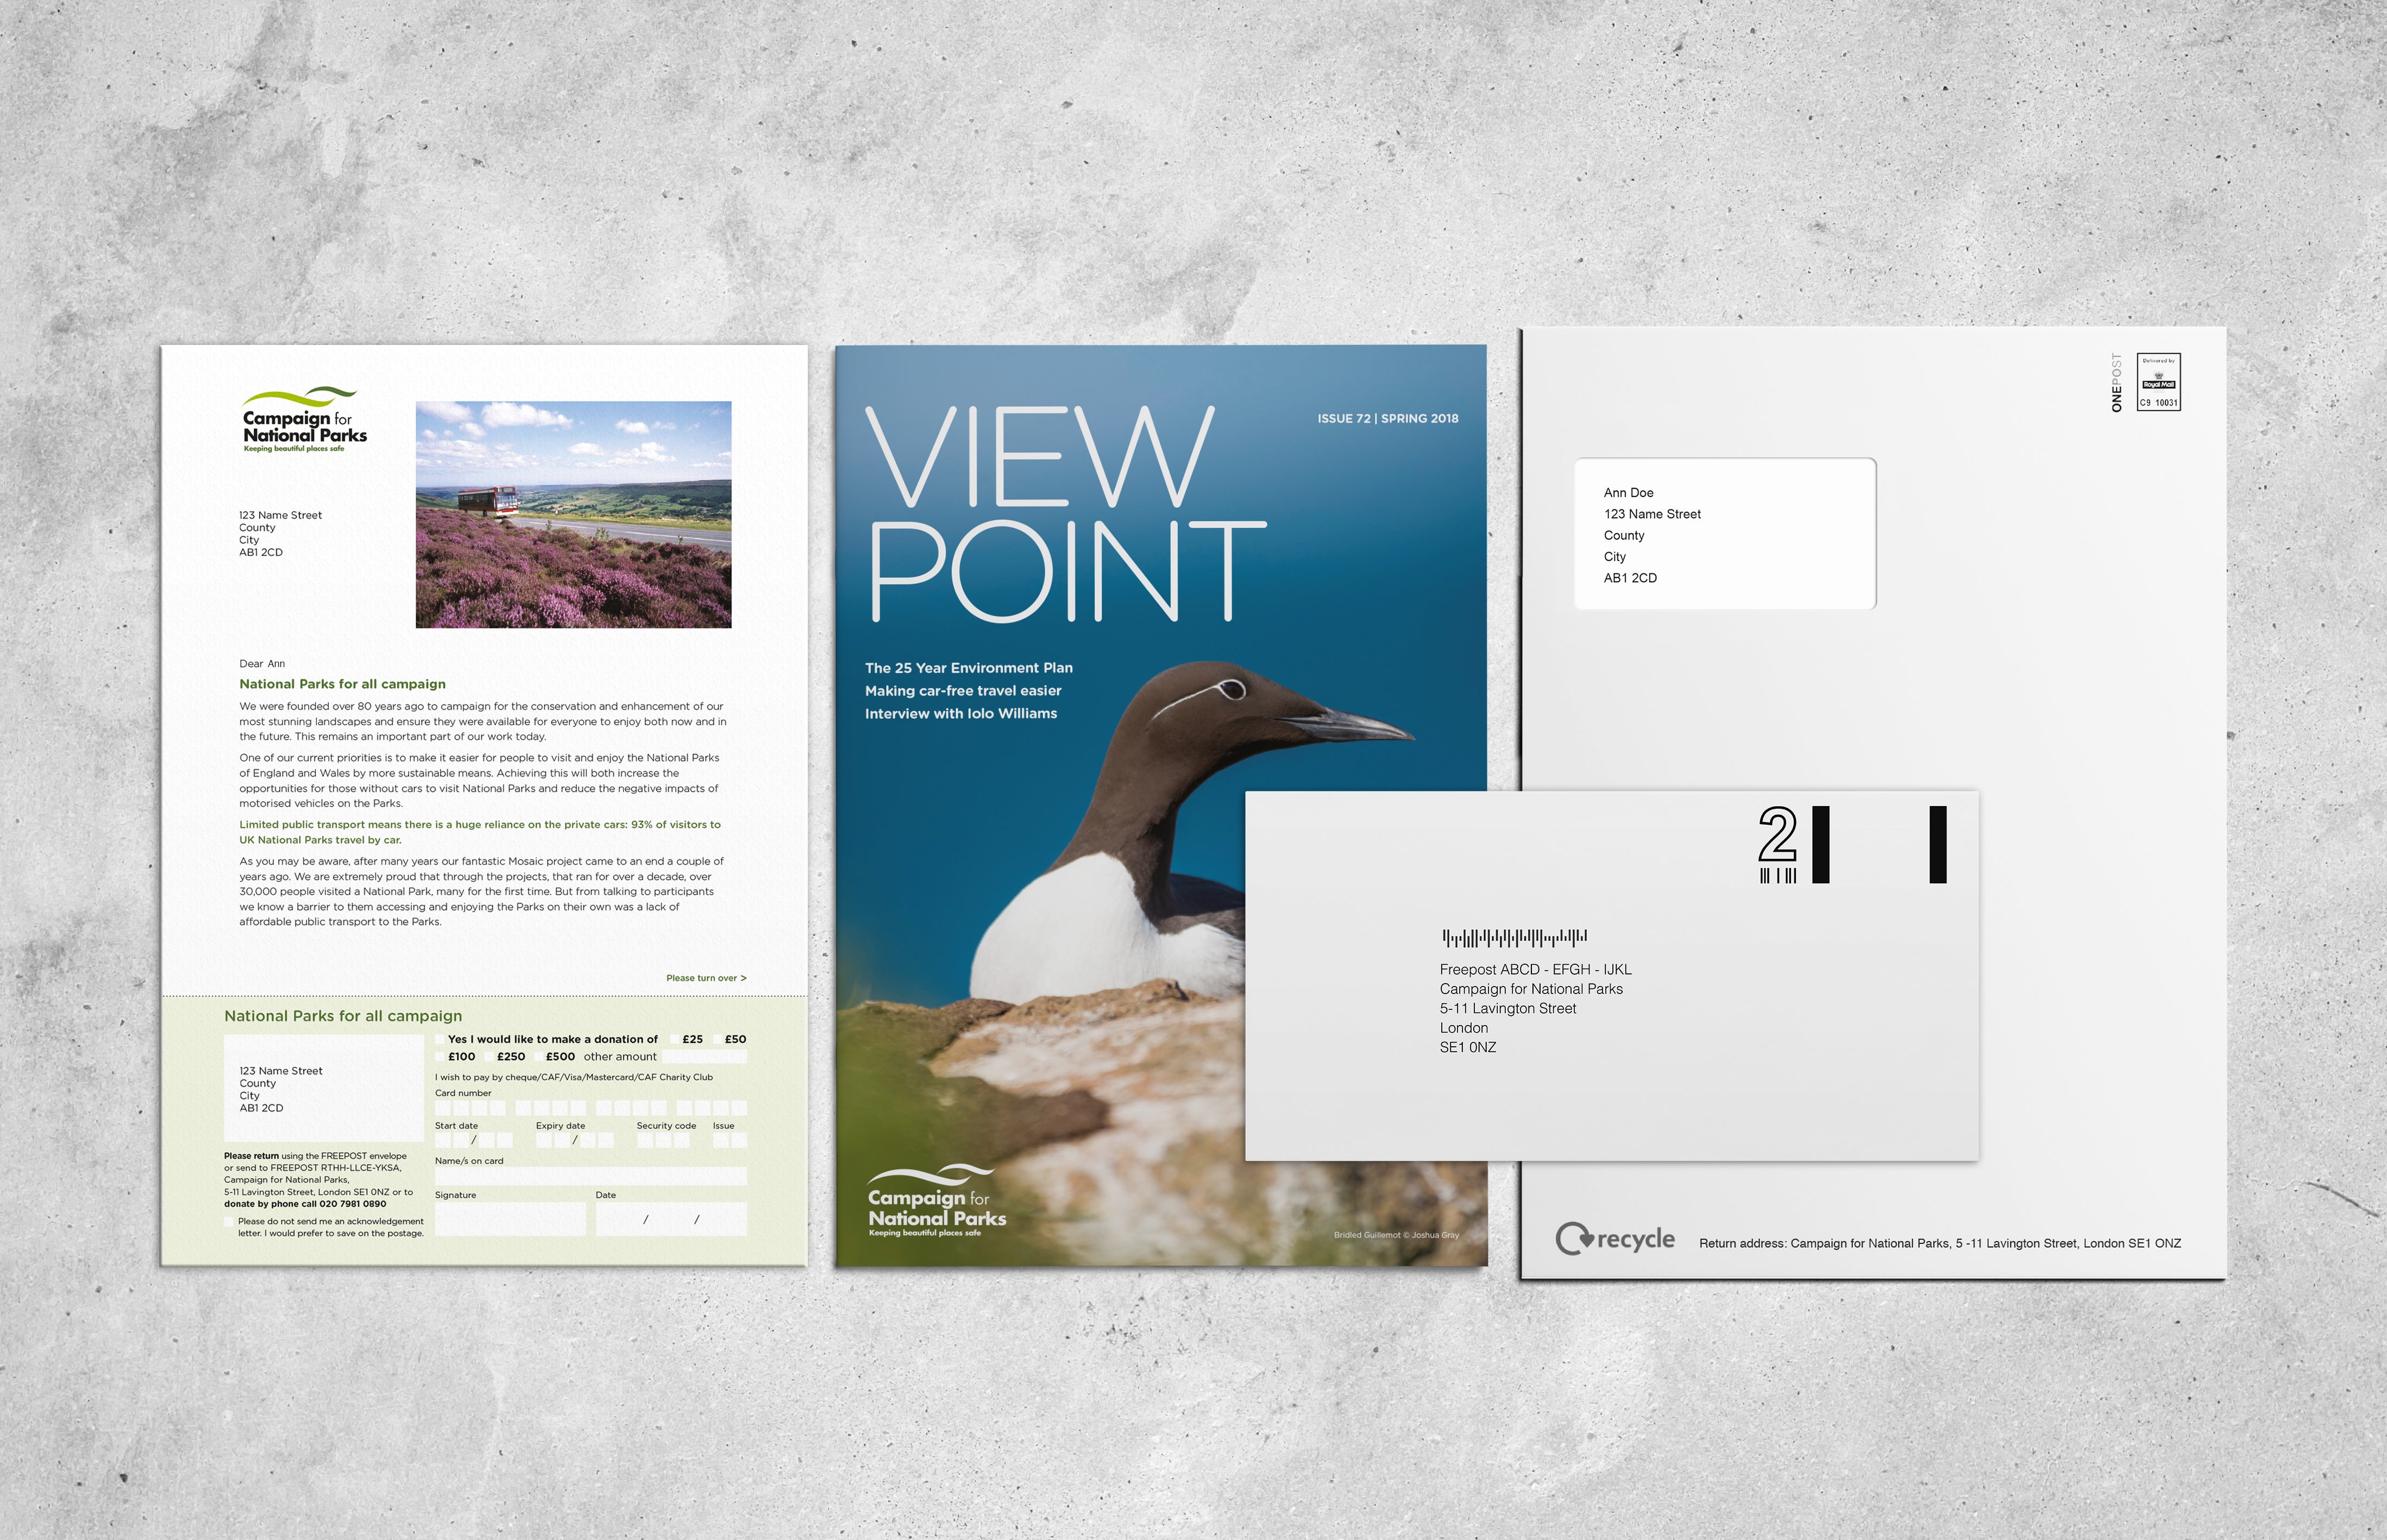 Campaign for National Parks printed magazine and direct mail letter